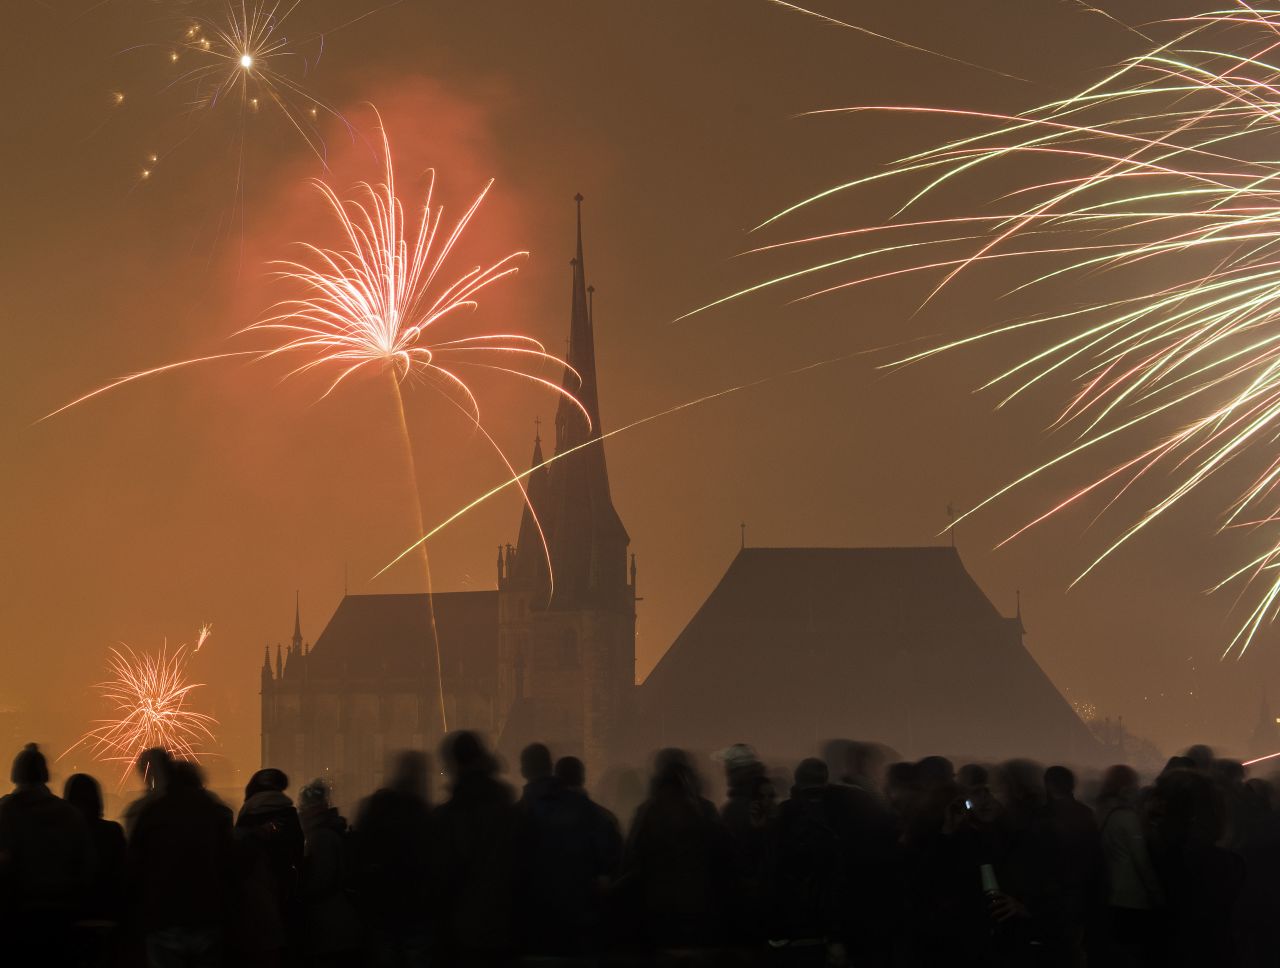 Fireworks light the sky above the medieval St. Mary's Cathedral and St. Severi Church in Erfurt, Germany.